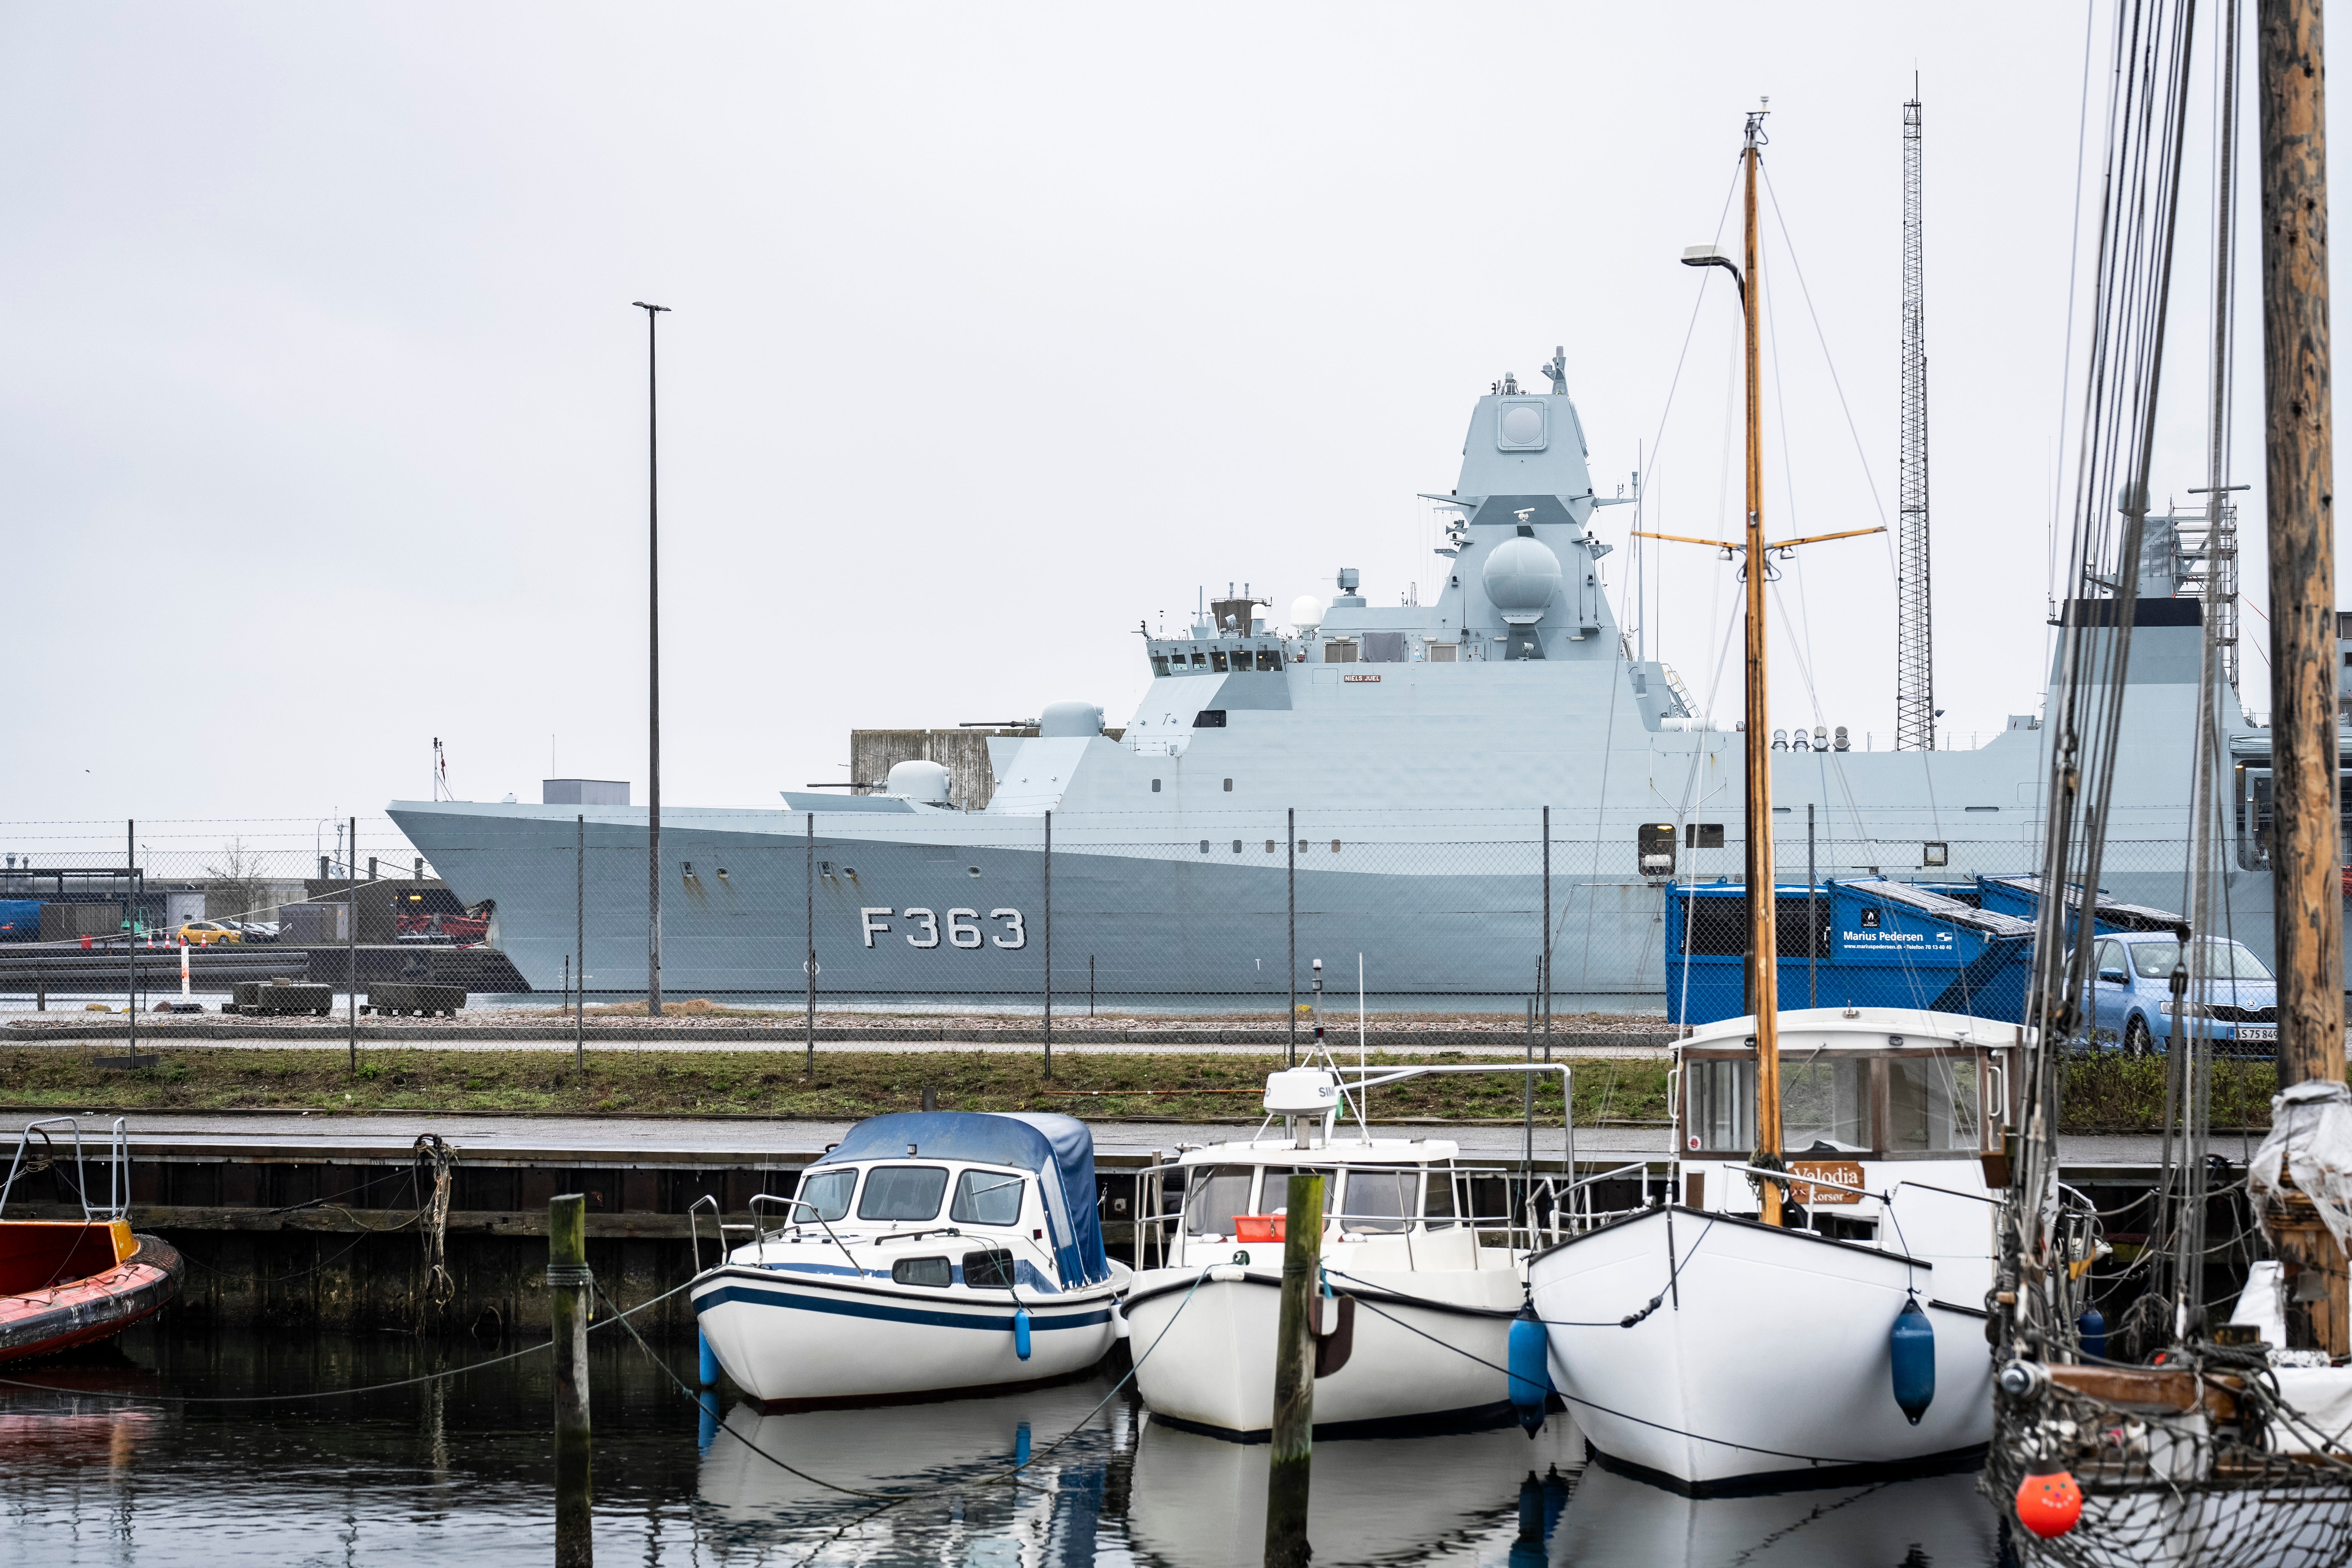 The Danish naval frigate ‘Niels Juel’ docked in Korsoer yesterday following the failed missile test